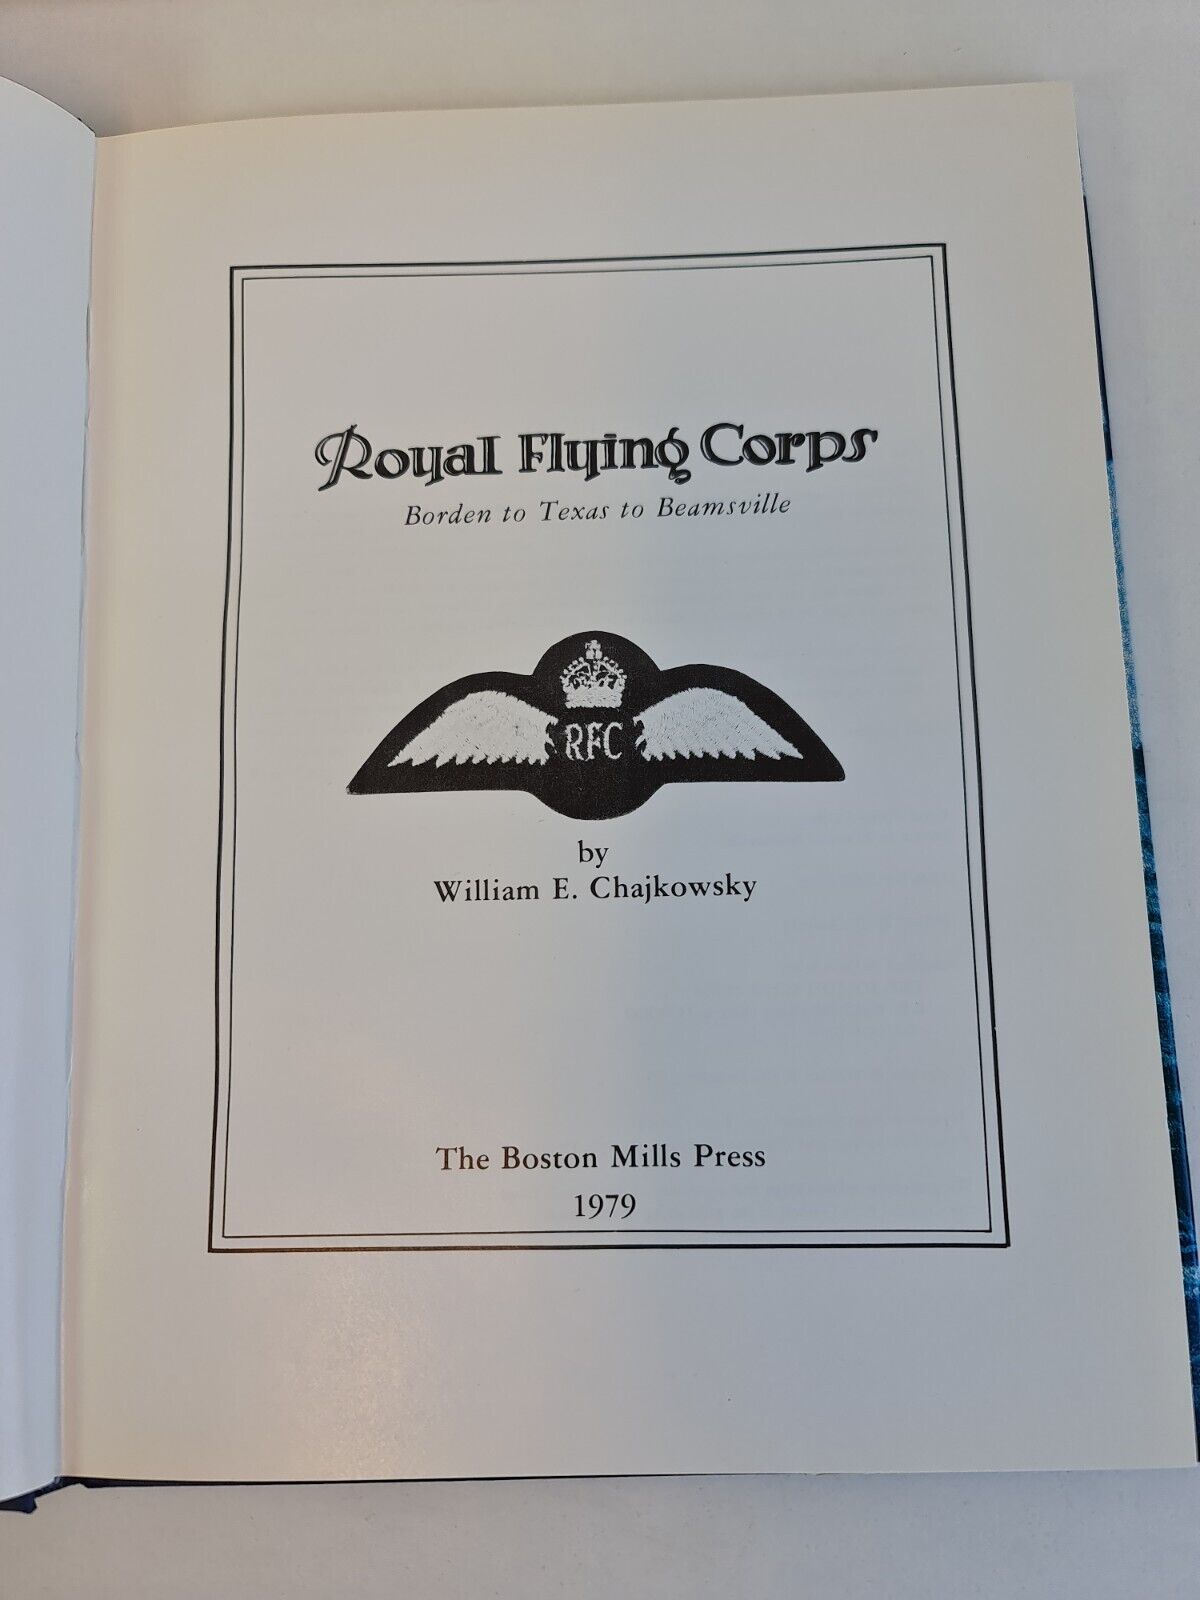 Royal Flying Corps: Borden to Texas to Beamsville by Chajkowsky (1979)